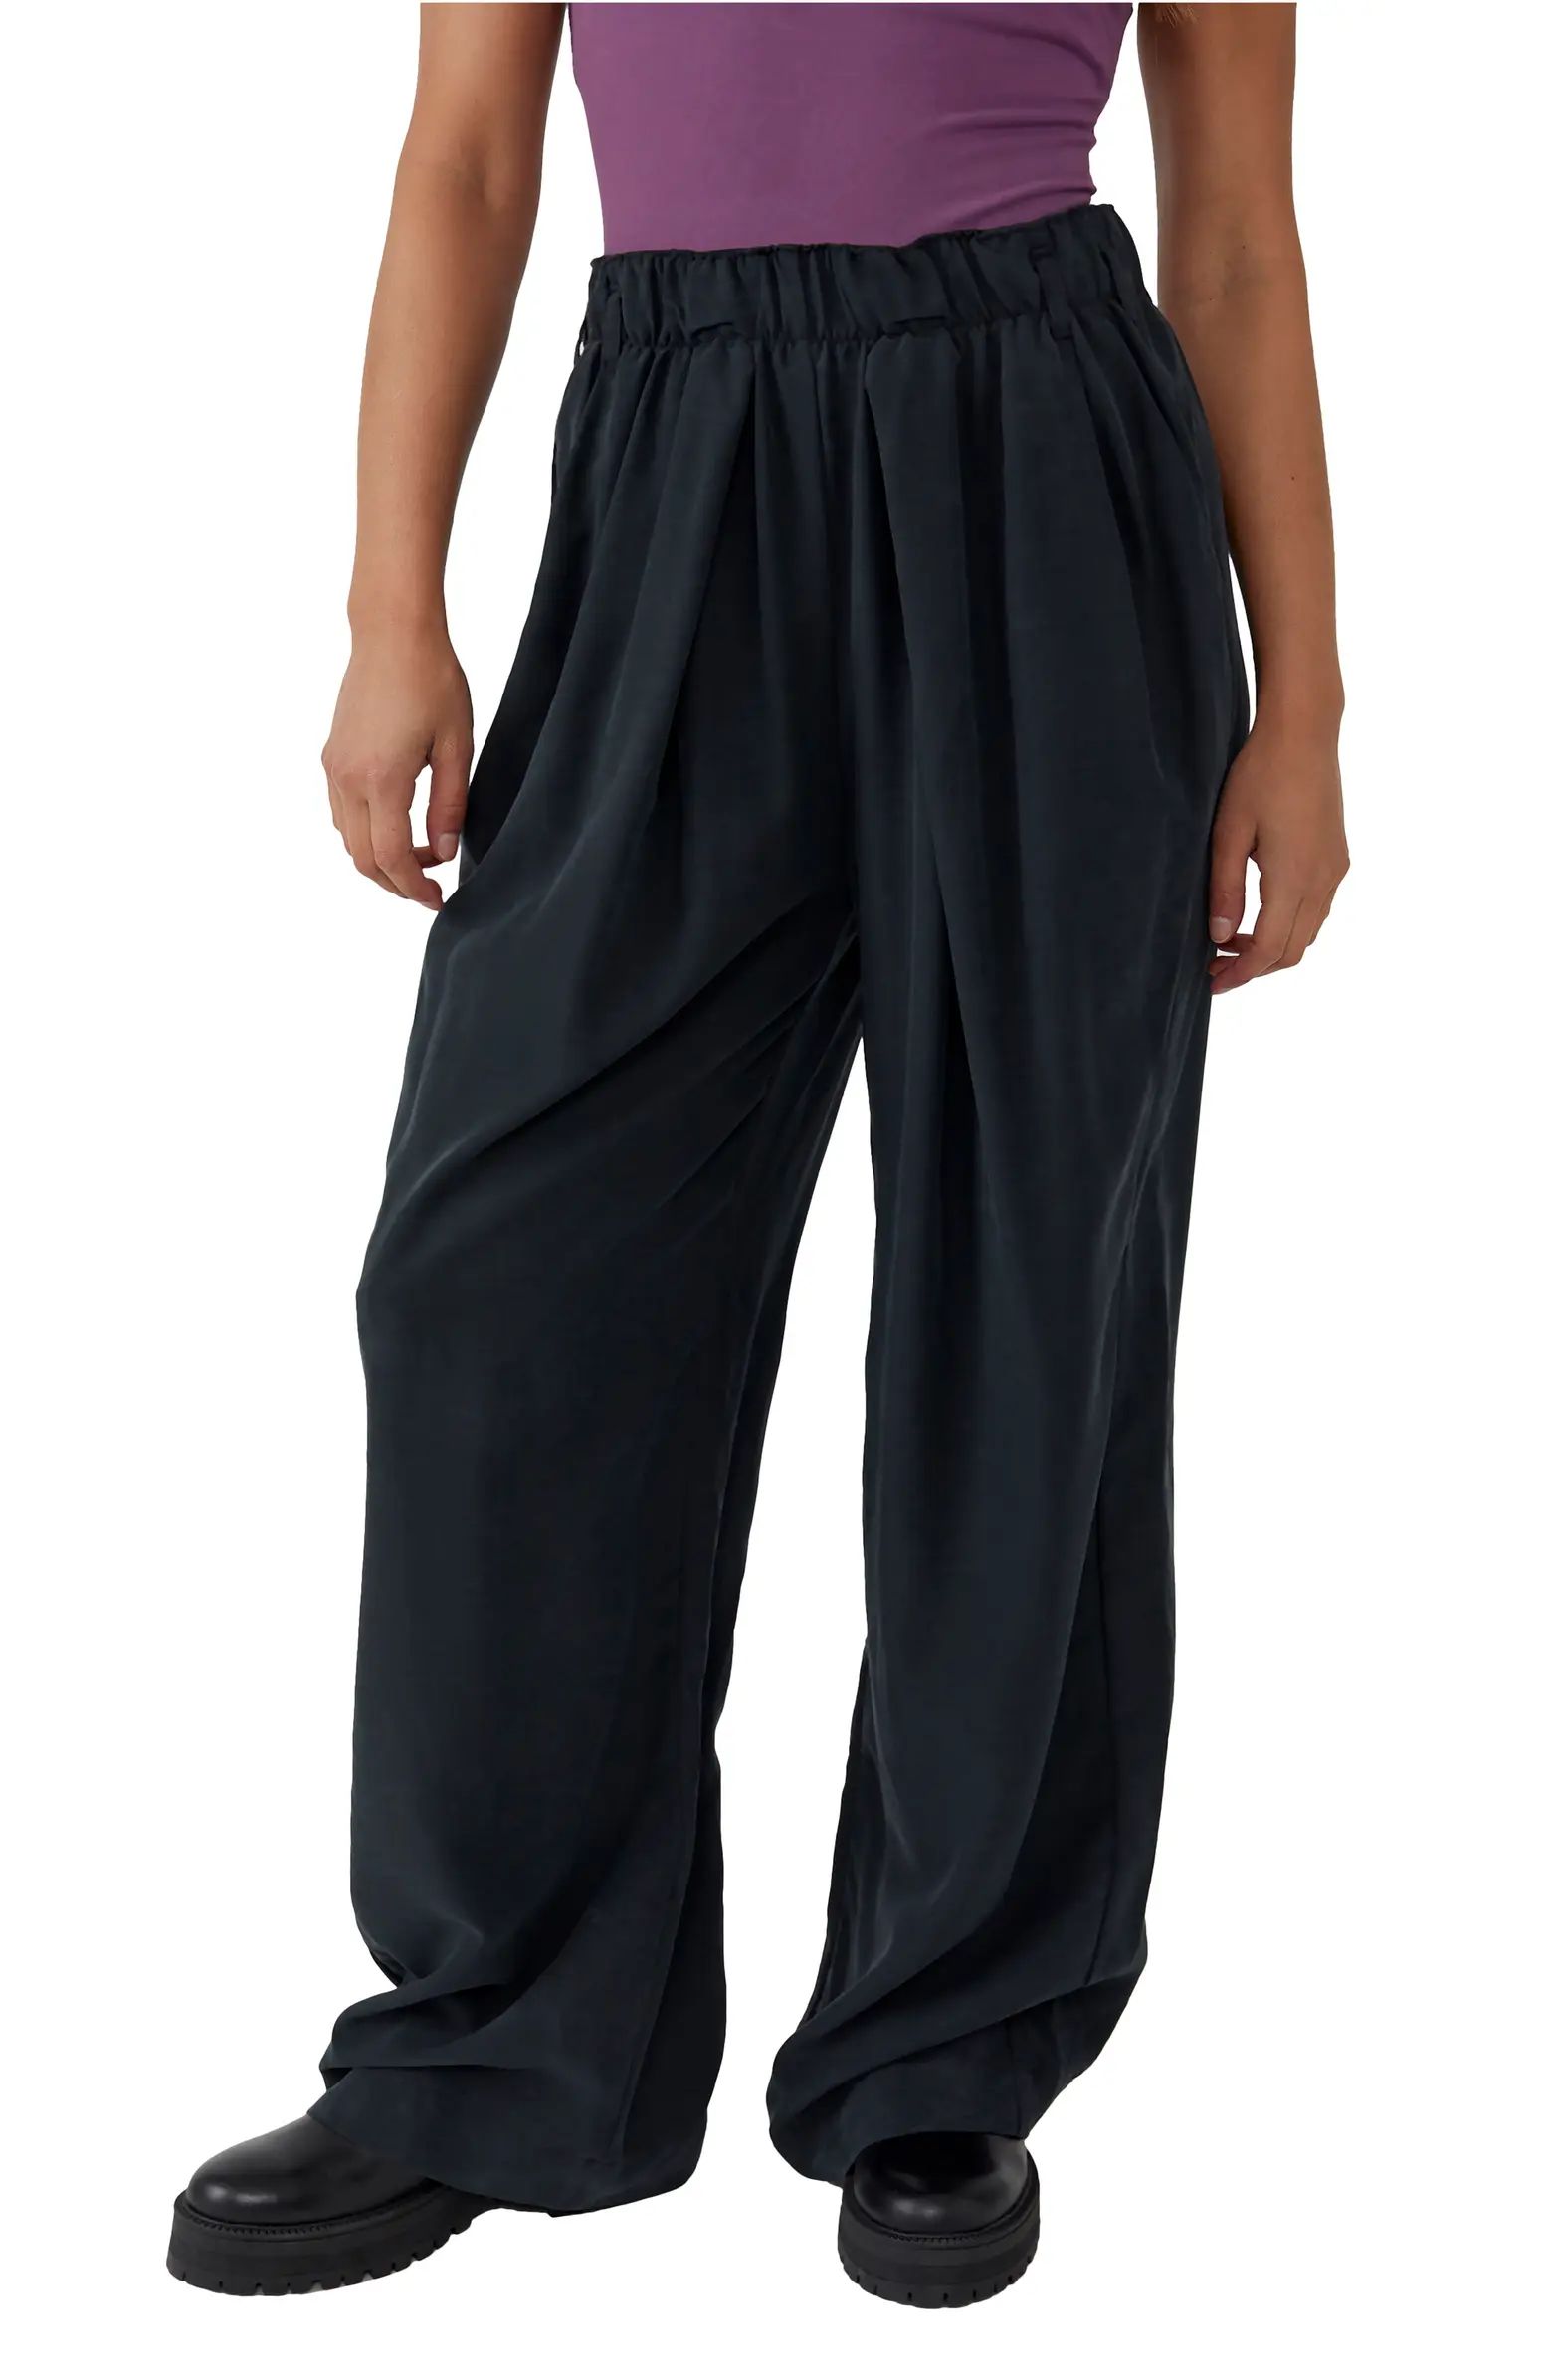 Nothin' to Say Elastic Waist Pants | Nordstrom